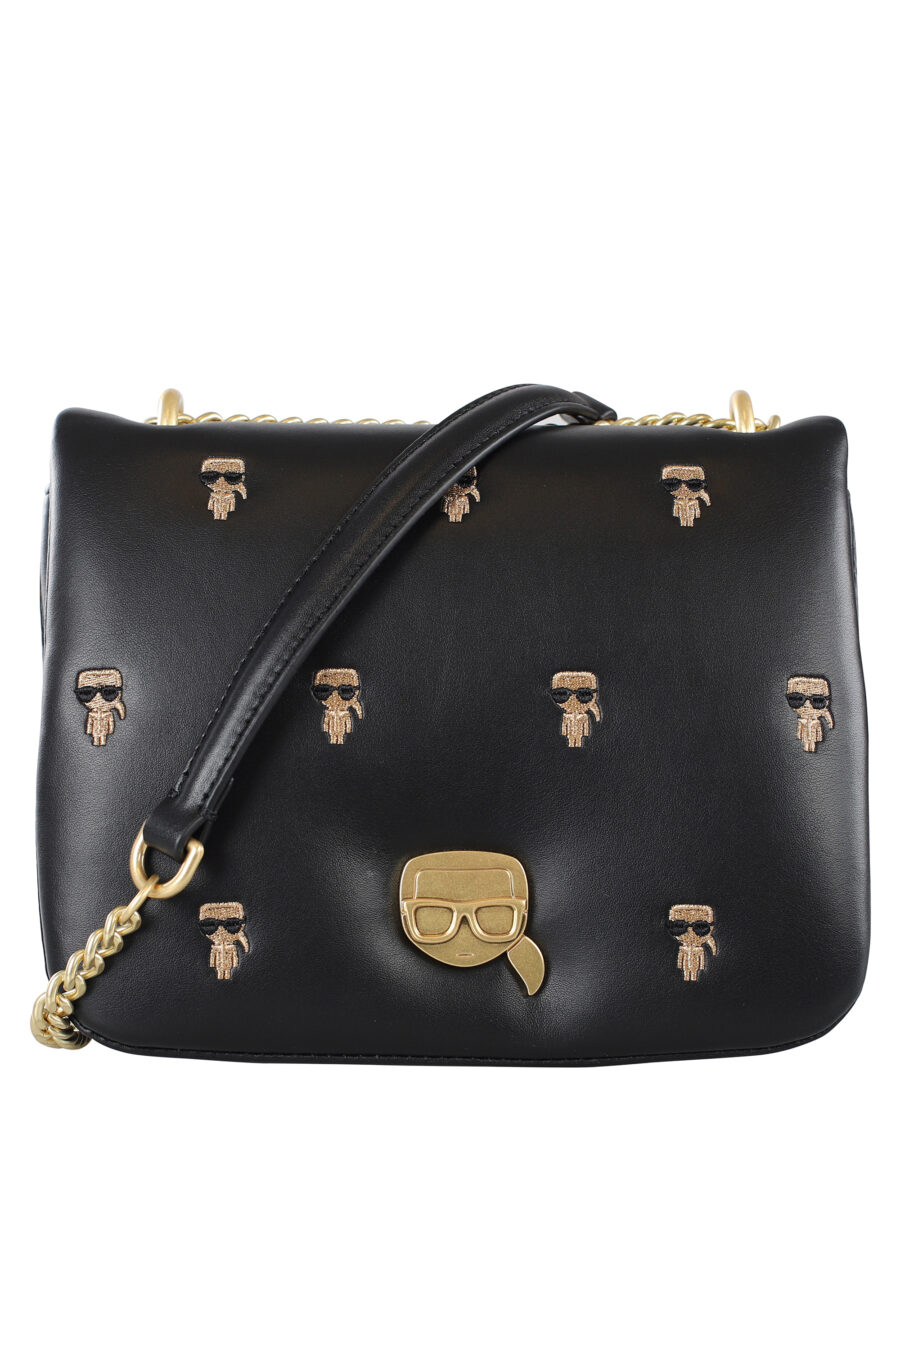 Mini shoulder bag black "all over logo" in studs and golden chain - IMG 6960